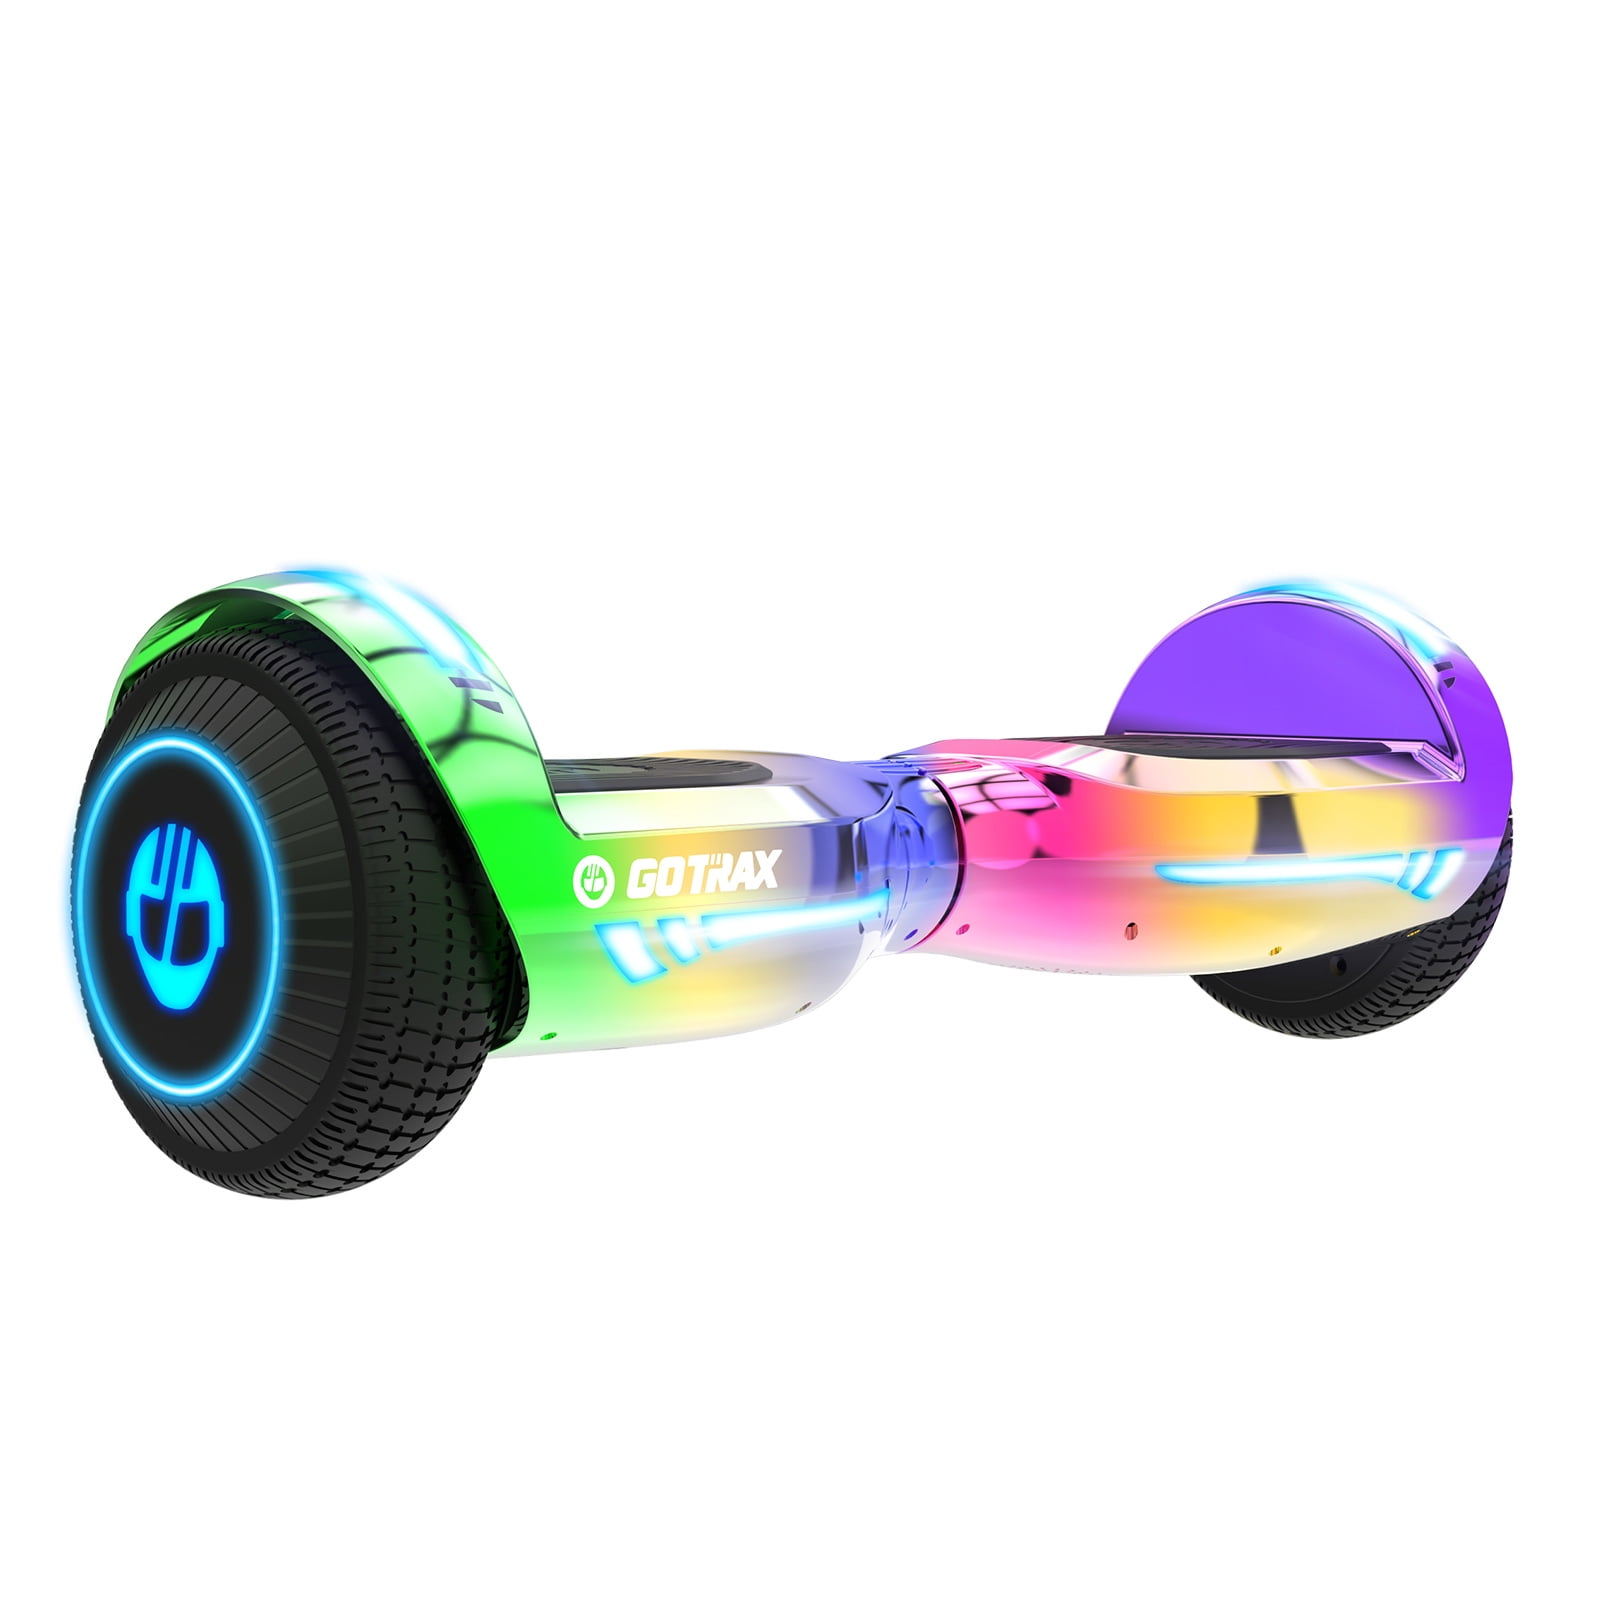 Gotrax Glide 6.5" Hoverboard for Kids Ages 6-12 with Bluetooth Speaker and led lights, Multicolor